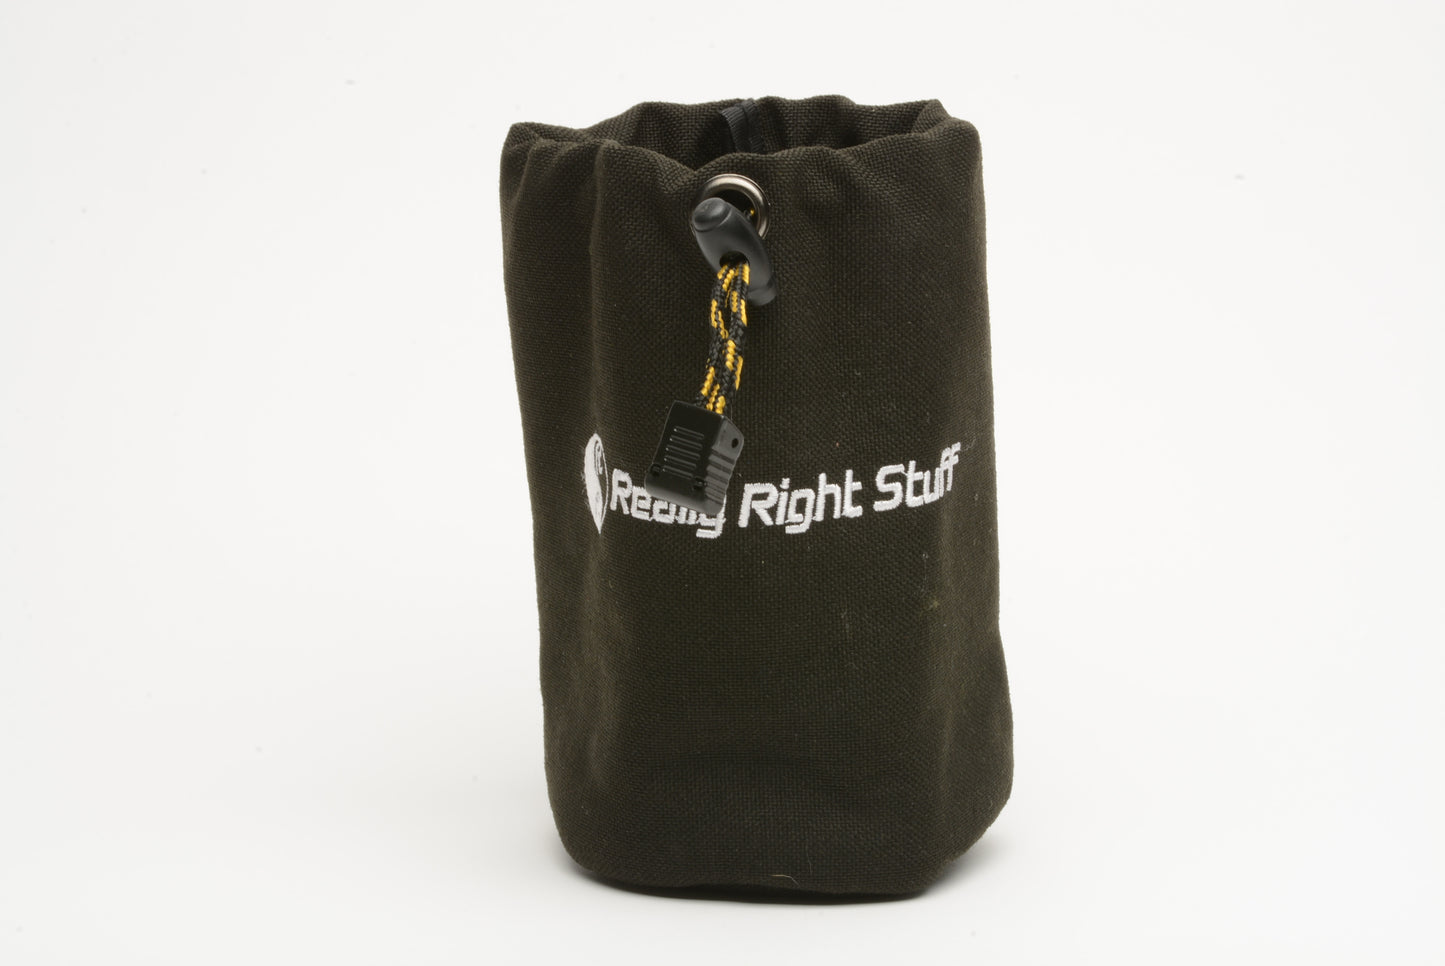 RRS Really Right Stuff string tie pouch ~6" tall x 3.5" diameter